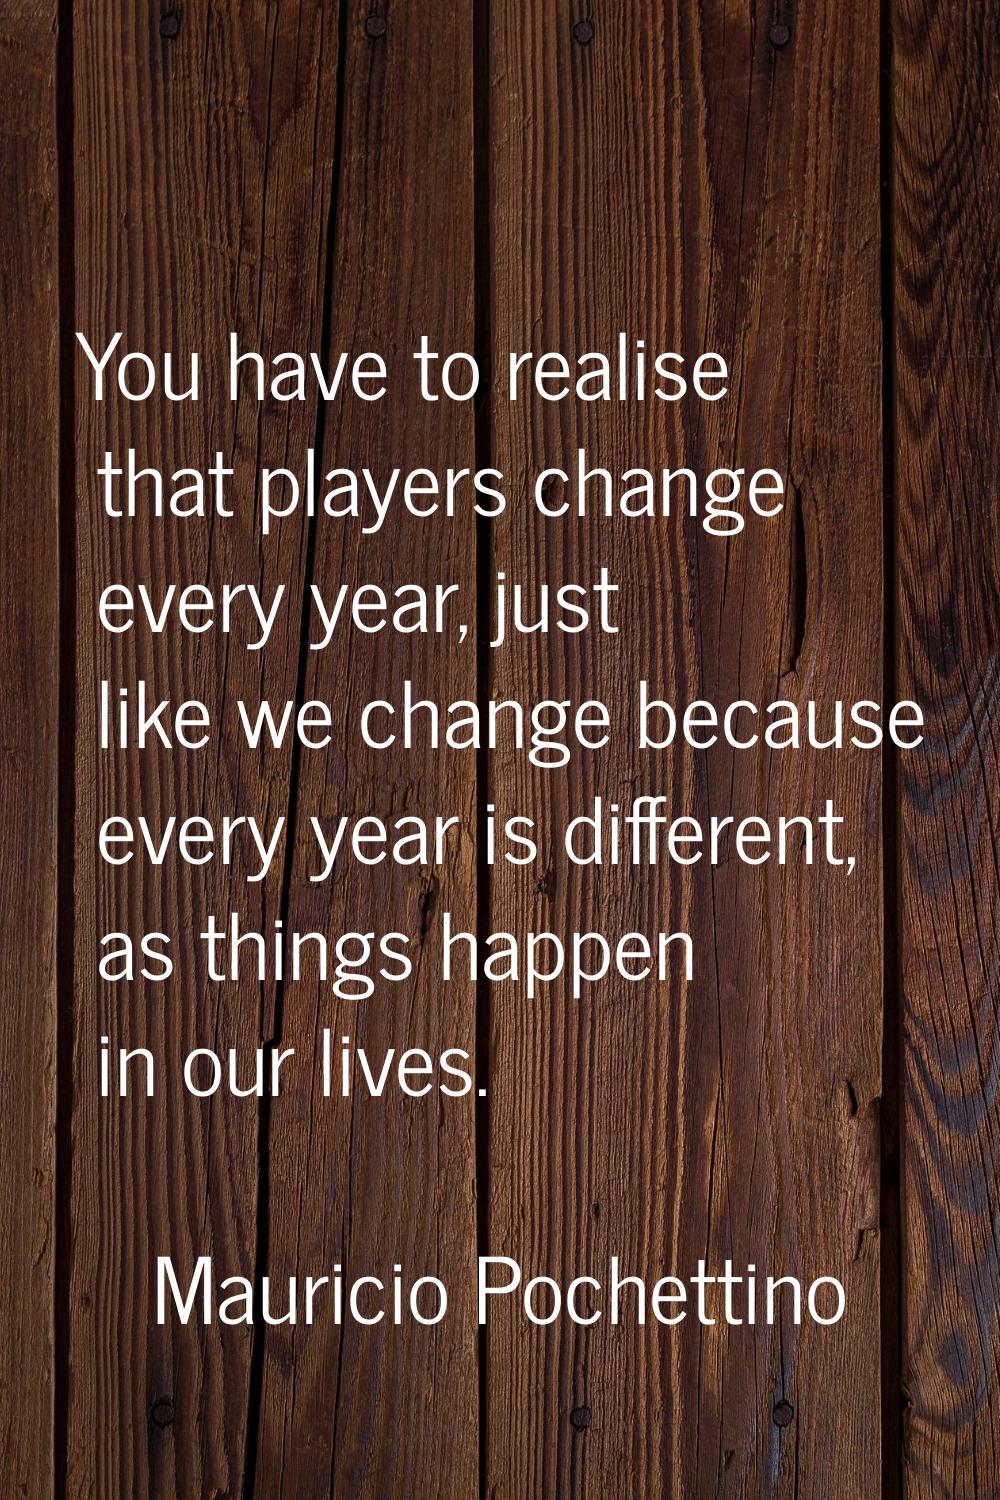 You have to realise that players change every year, just like we change because every year is diffe